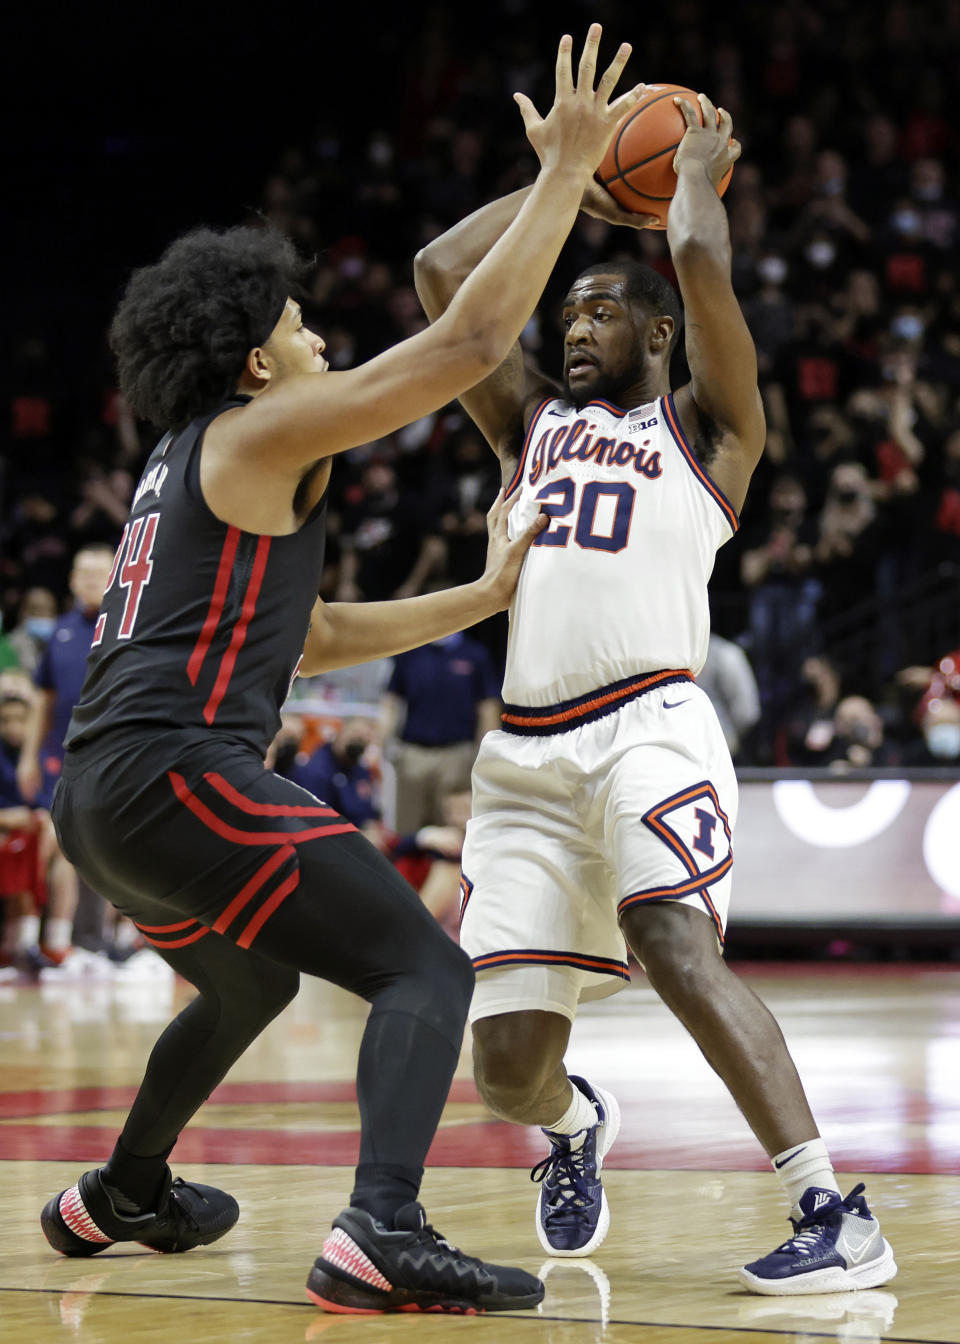 Illinois guard Da'Monte Williams (20) looks to pass the ball as Rutgers forward Ron Harper Jr. defends during the first half of an NCAA college basketball game Wednesday, Feb. 16, 2022, in Piscataway, N.J. (AP Photo/Adam Hunger)